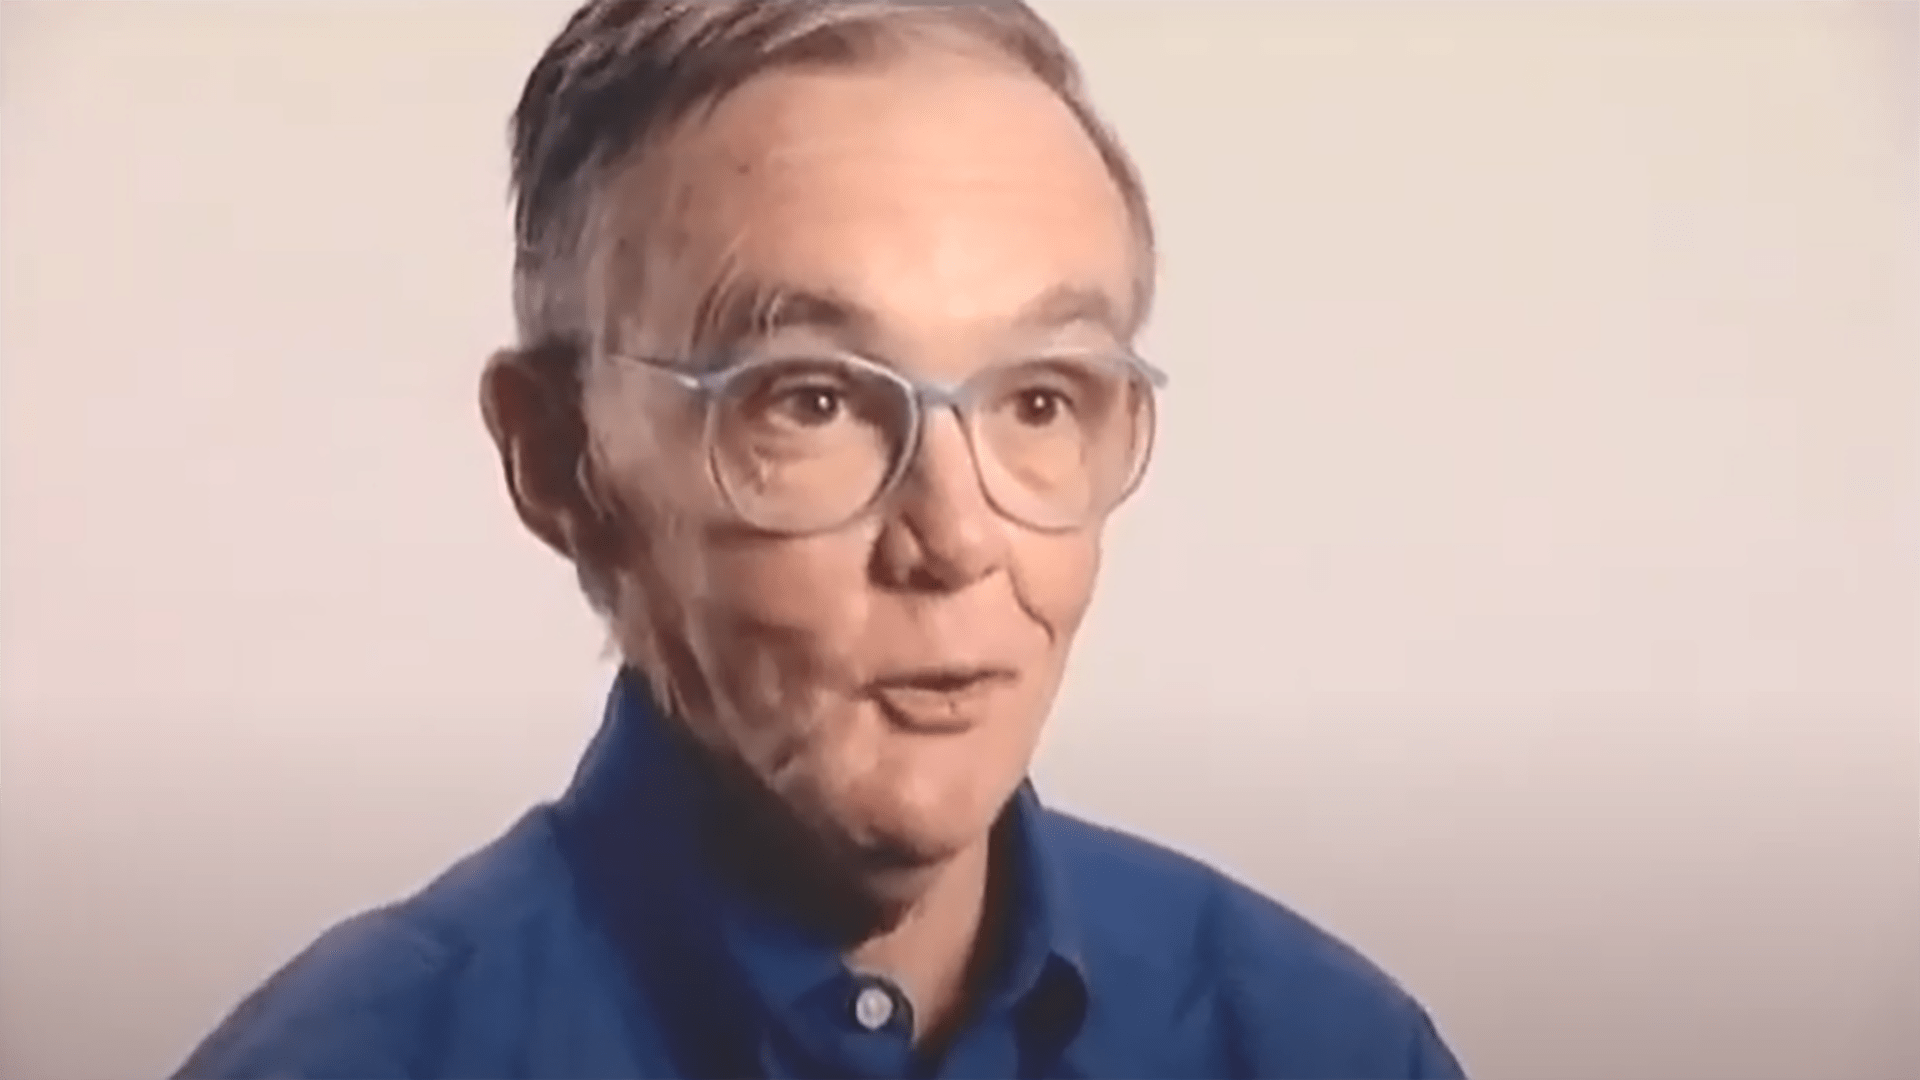 A senior gentleman is interviewed wearing glasses and a blue shirt